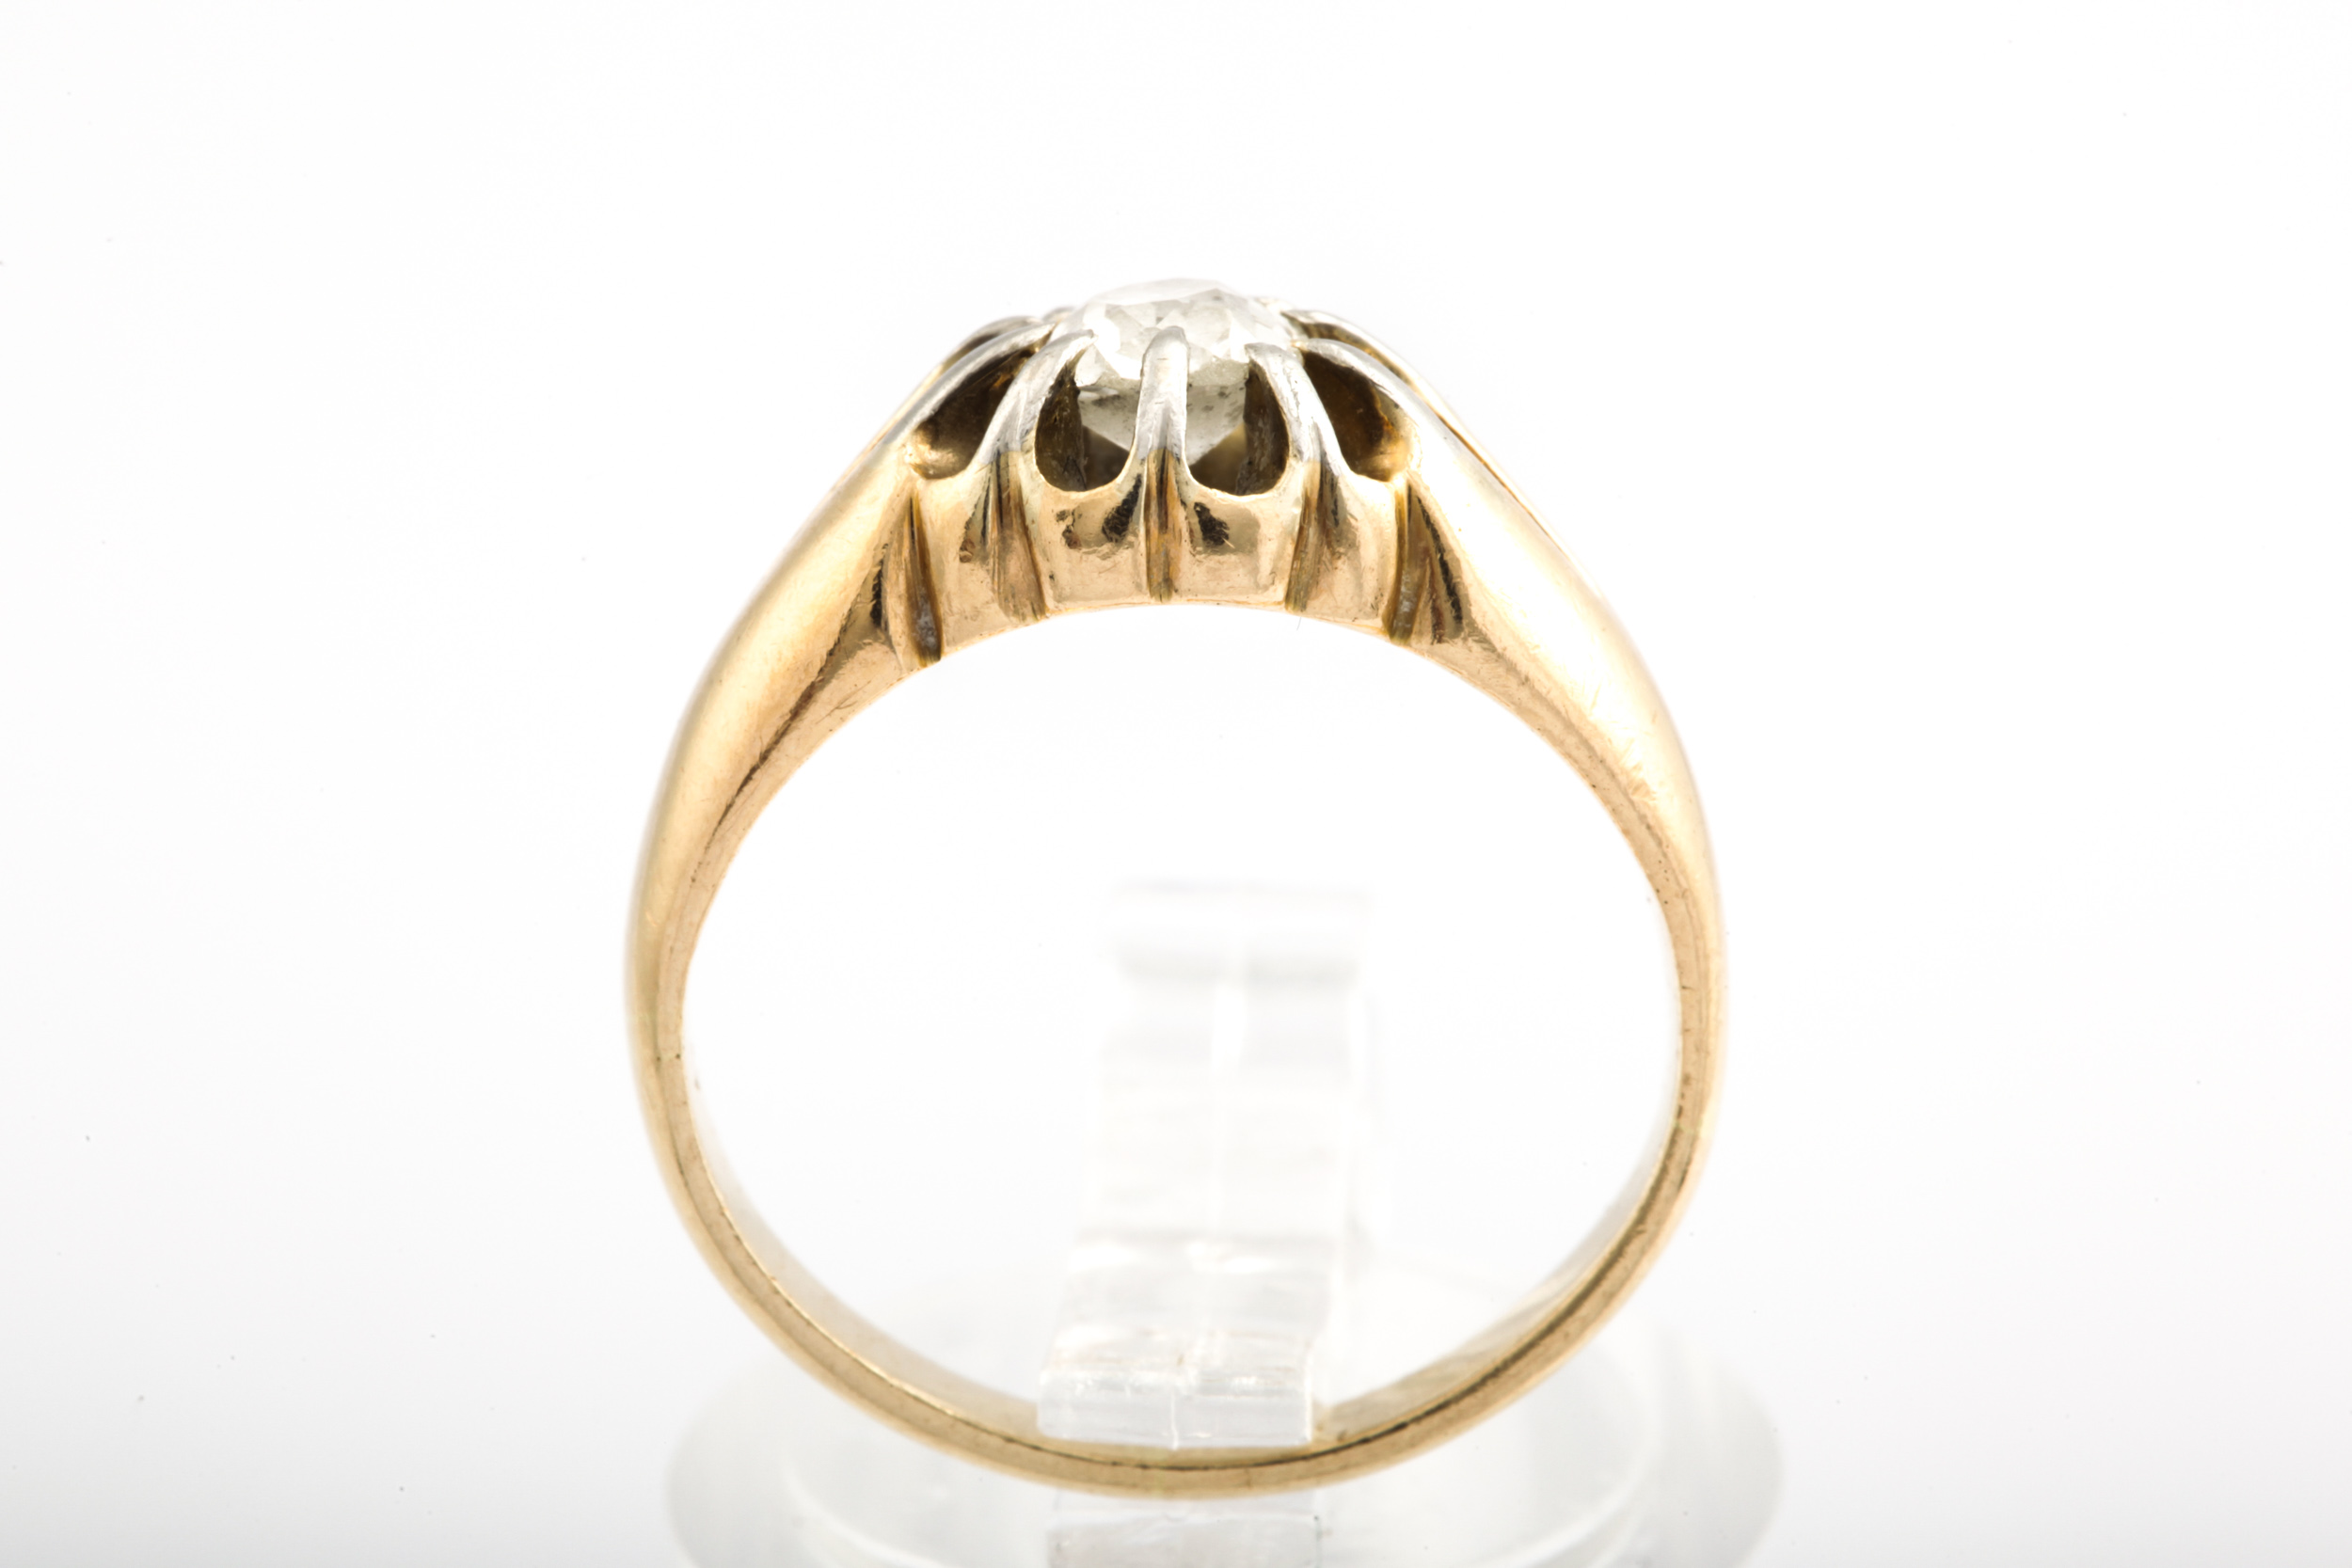 An early 20th century gold and diamond solitaire gypsy ring. - Image 2 of 3